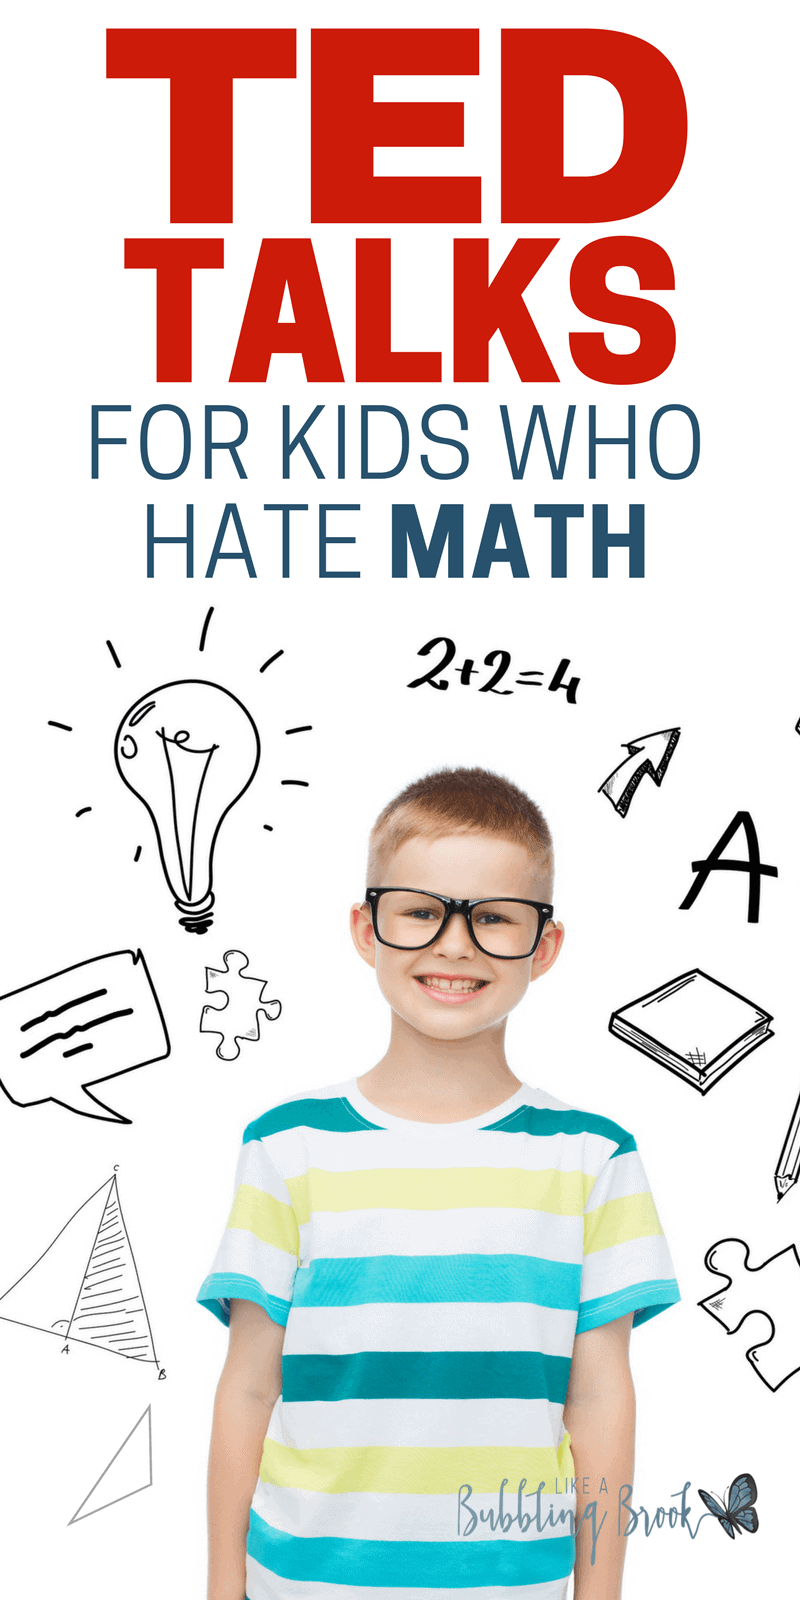 TED Talks for middle school kids who hate math